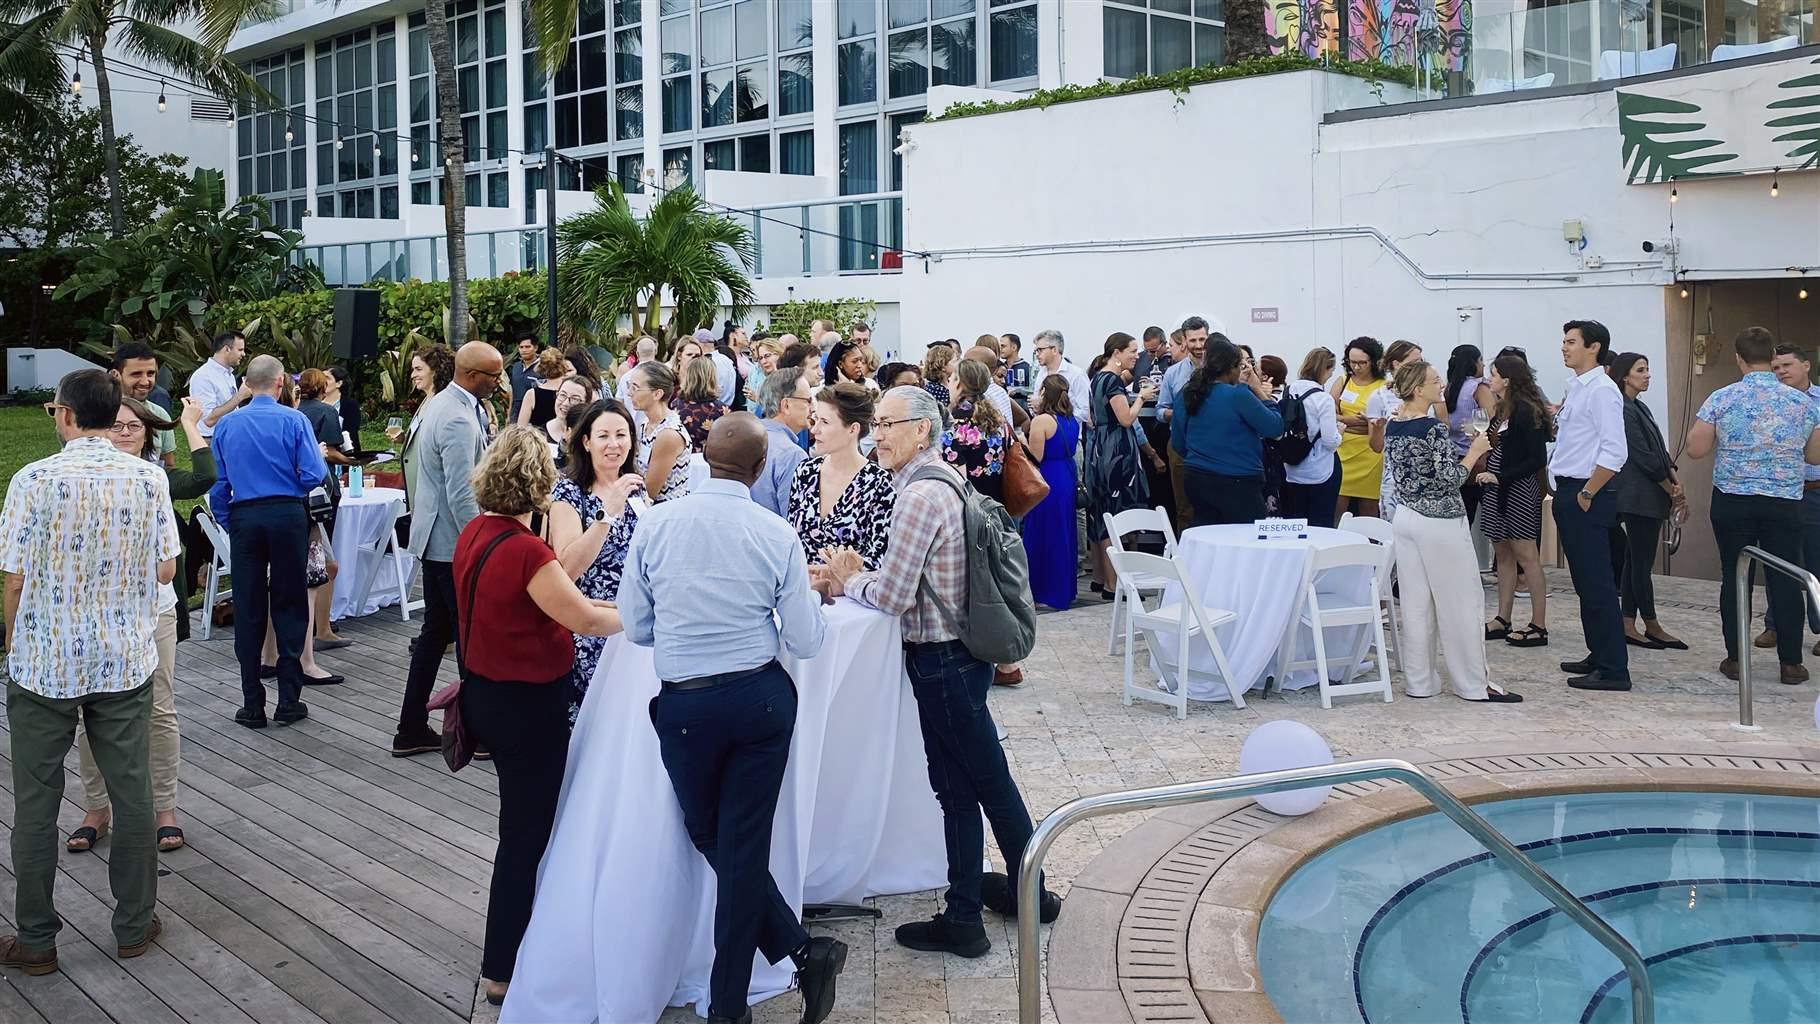 Conference attendees socialize on a patio near a pool. Palm trees and a white building with windows are in the background. 